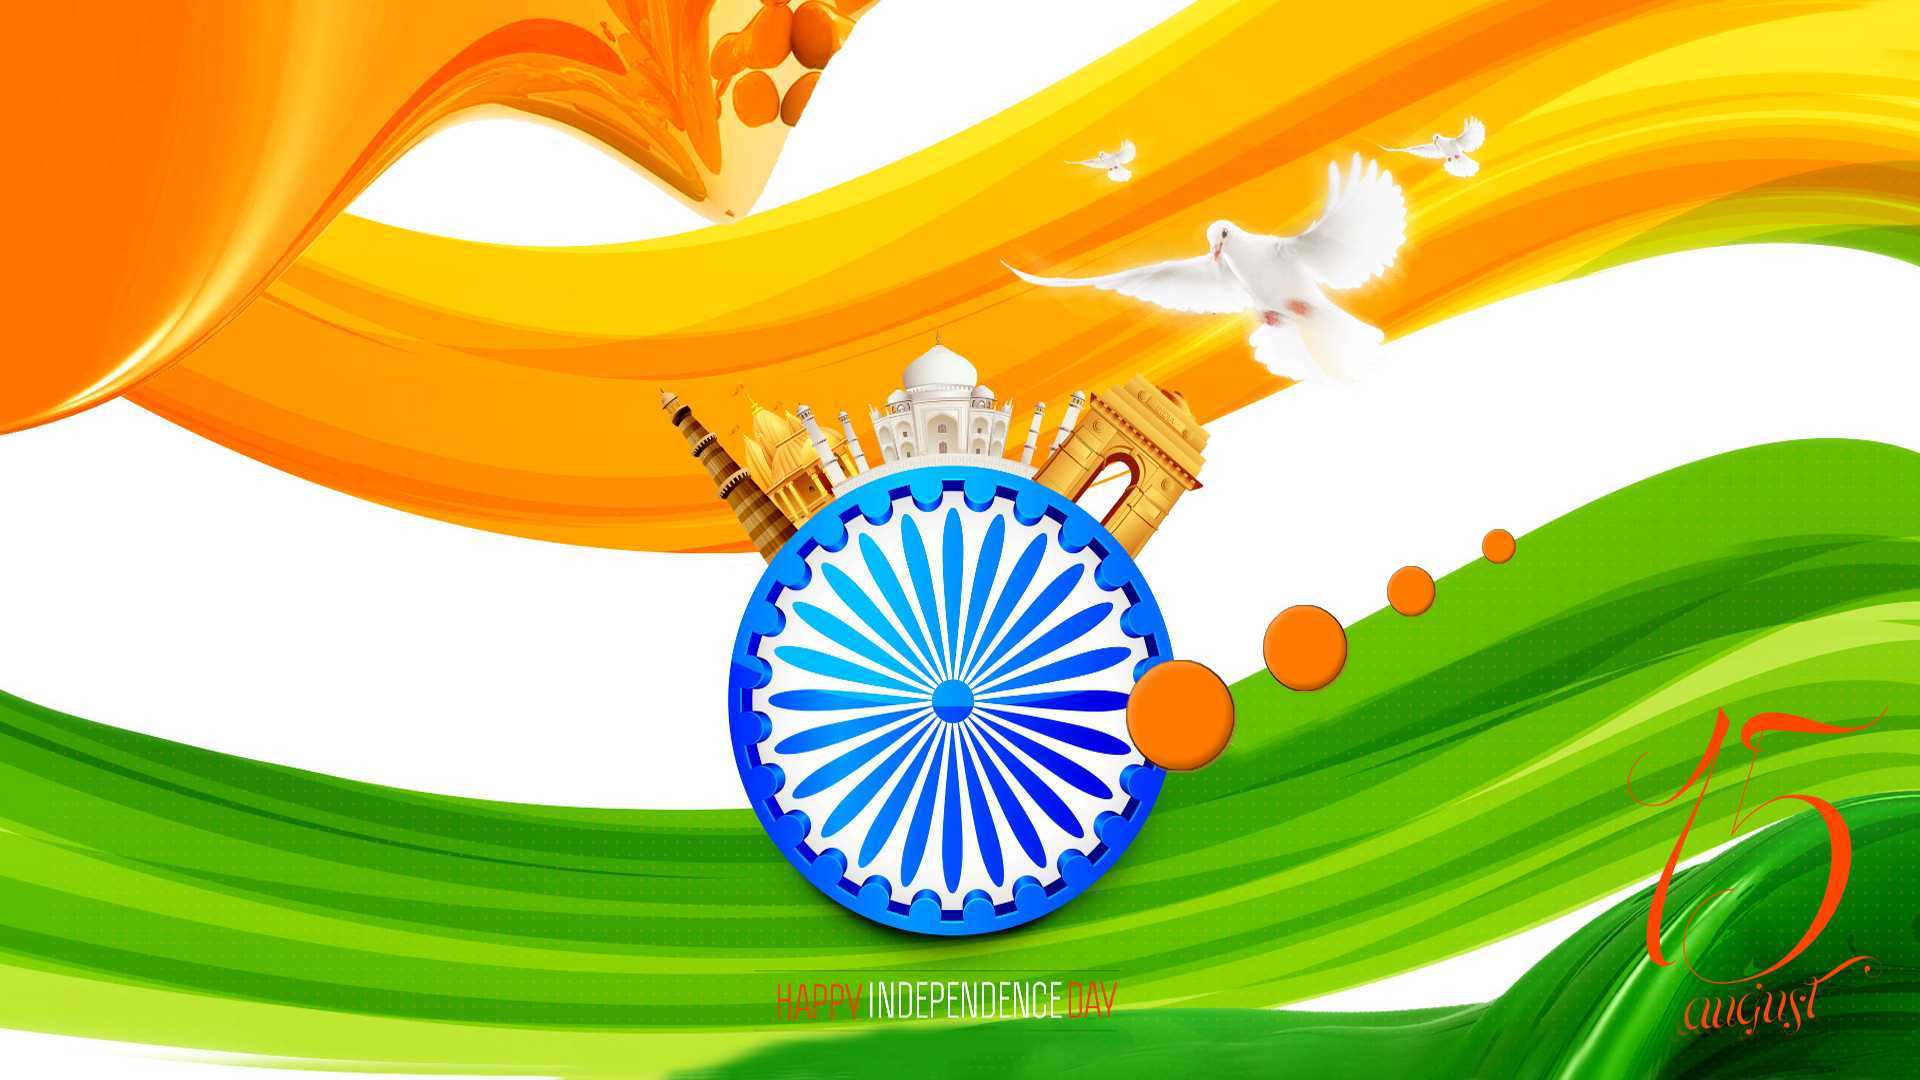 Indian Flag Wallpapers 2016 - Wallpaper Cave